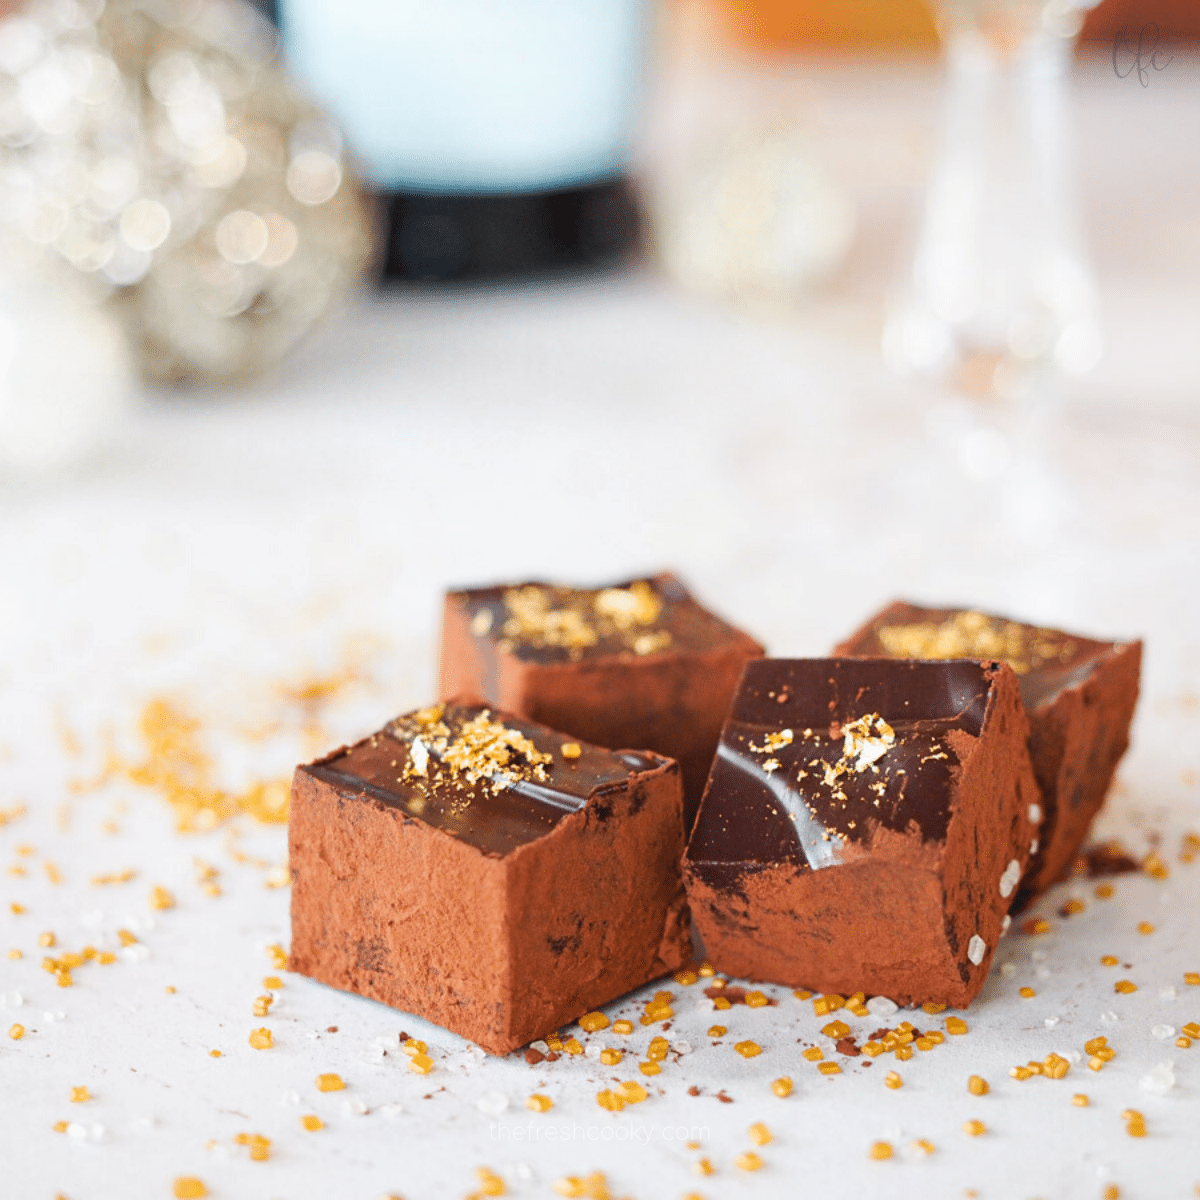 Square image of 4 Champagne Truffles dusted in cocoa powder and decorated with gold leaf sitting on marble with bottle of champagne behind and a stemmed glass.